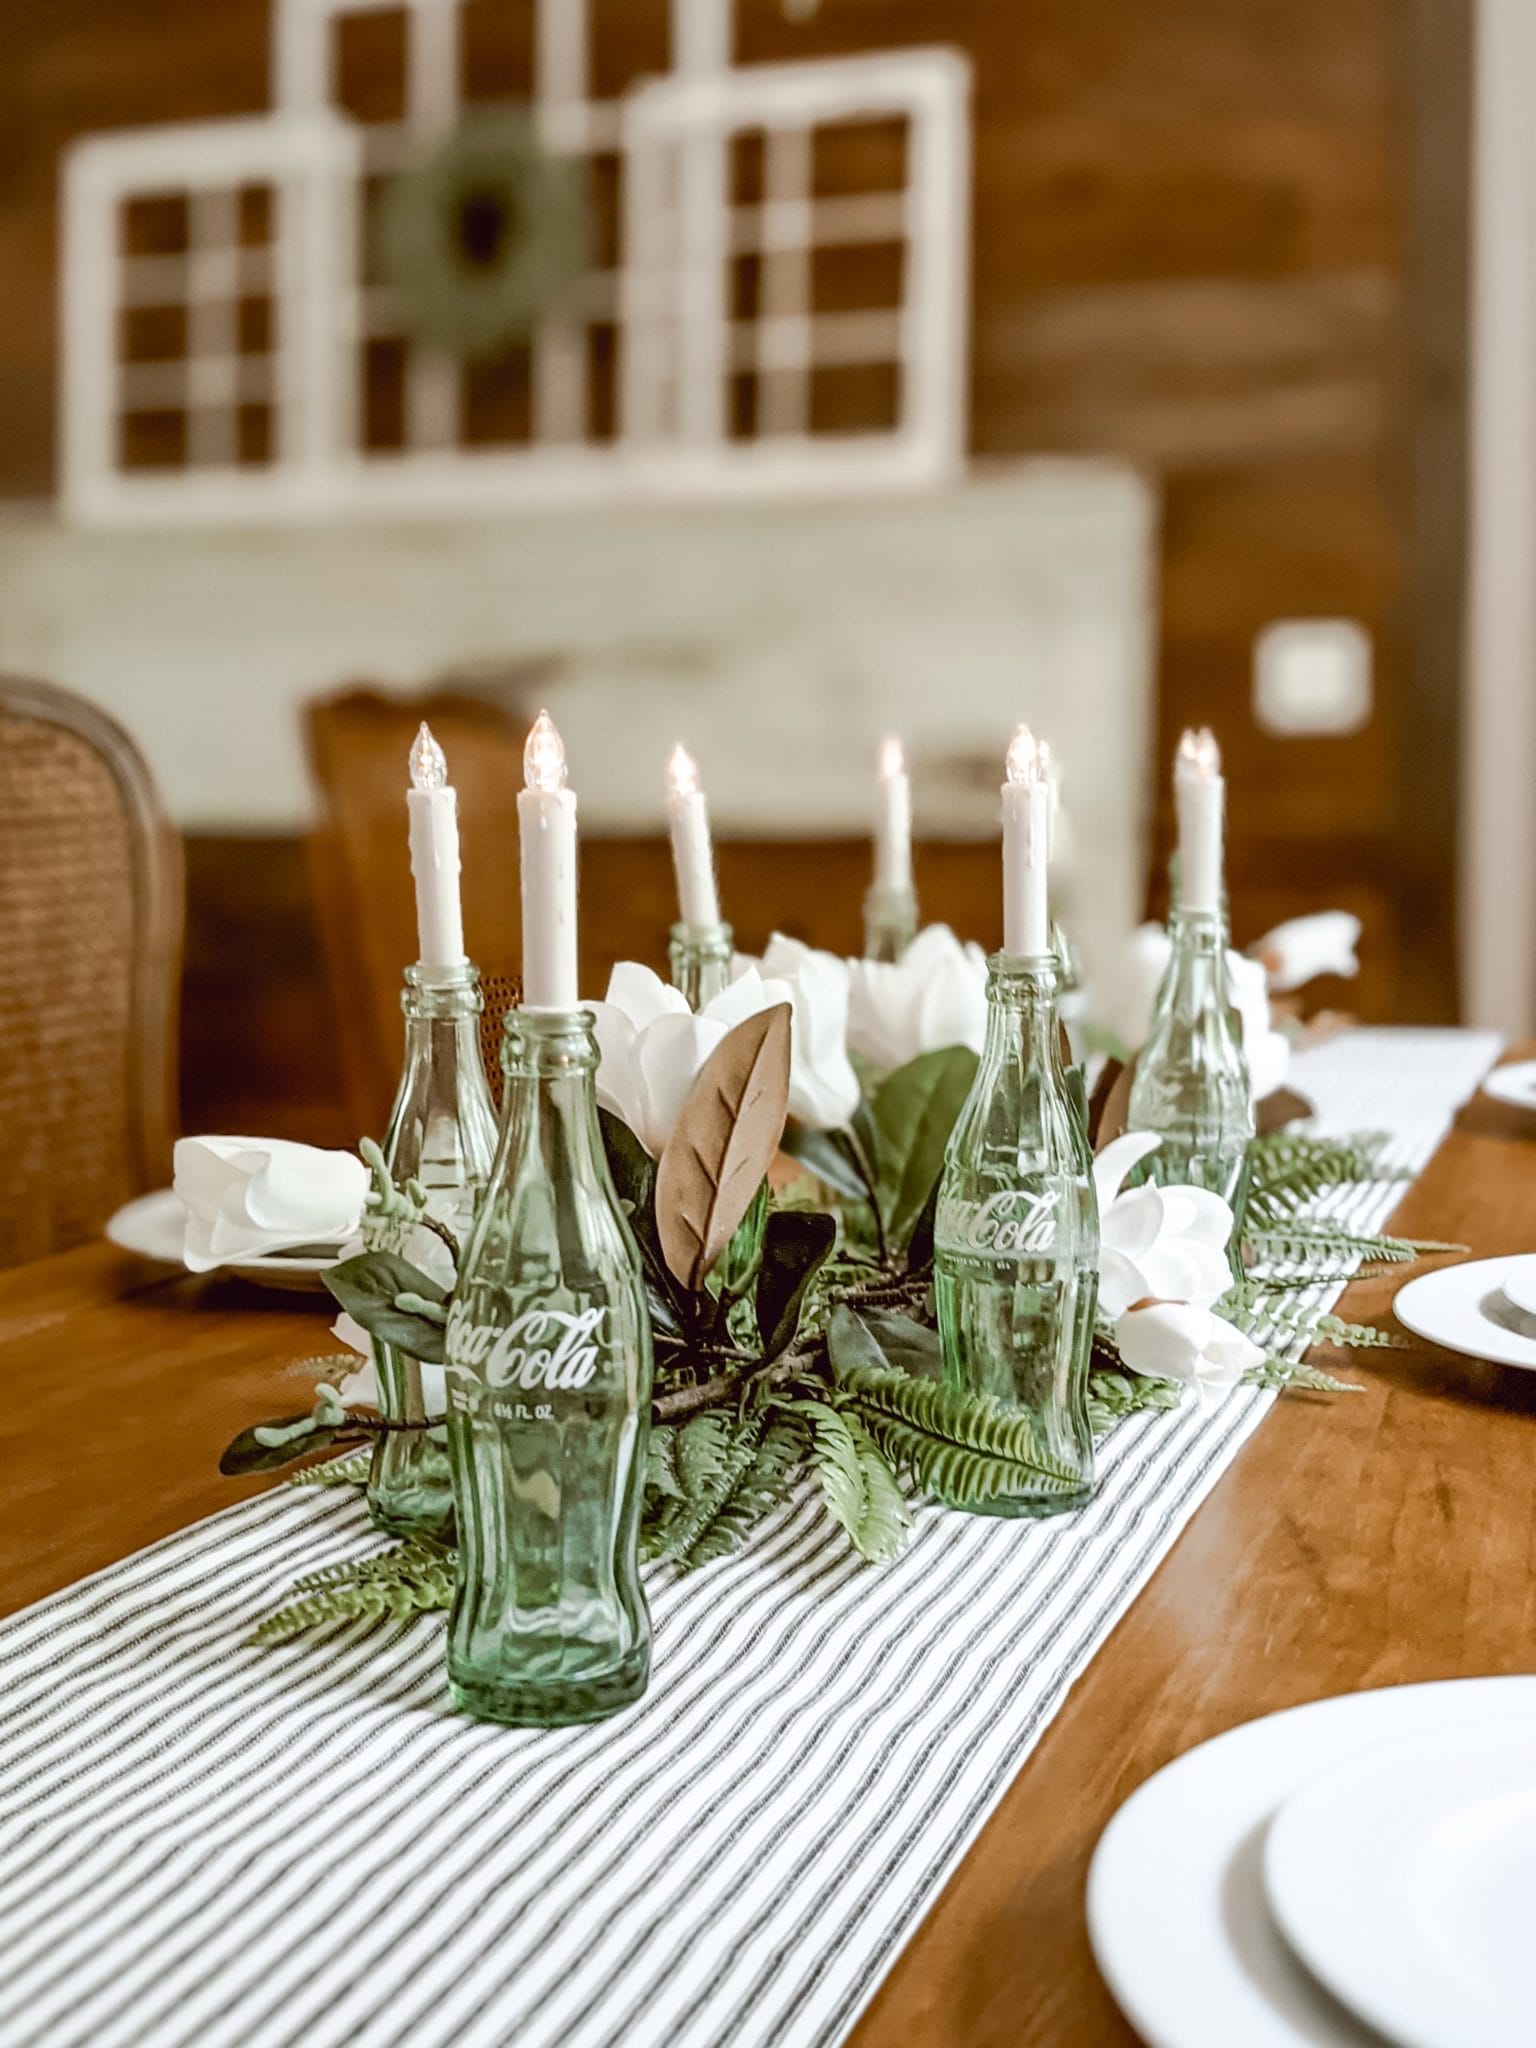 reuse green glass coca cola bottles as tapered candle holders for a table centerpiece